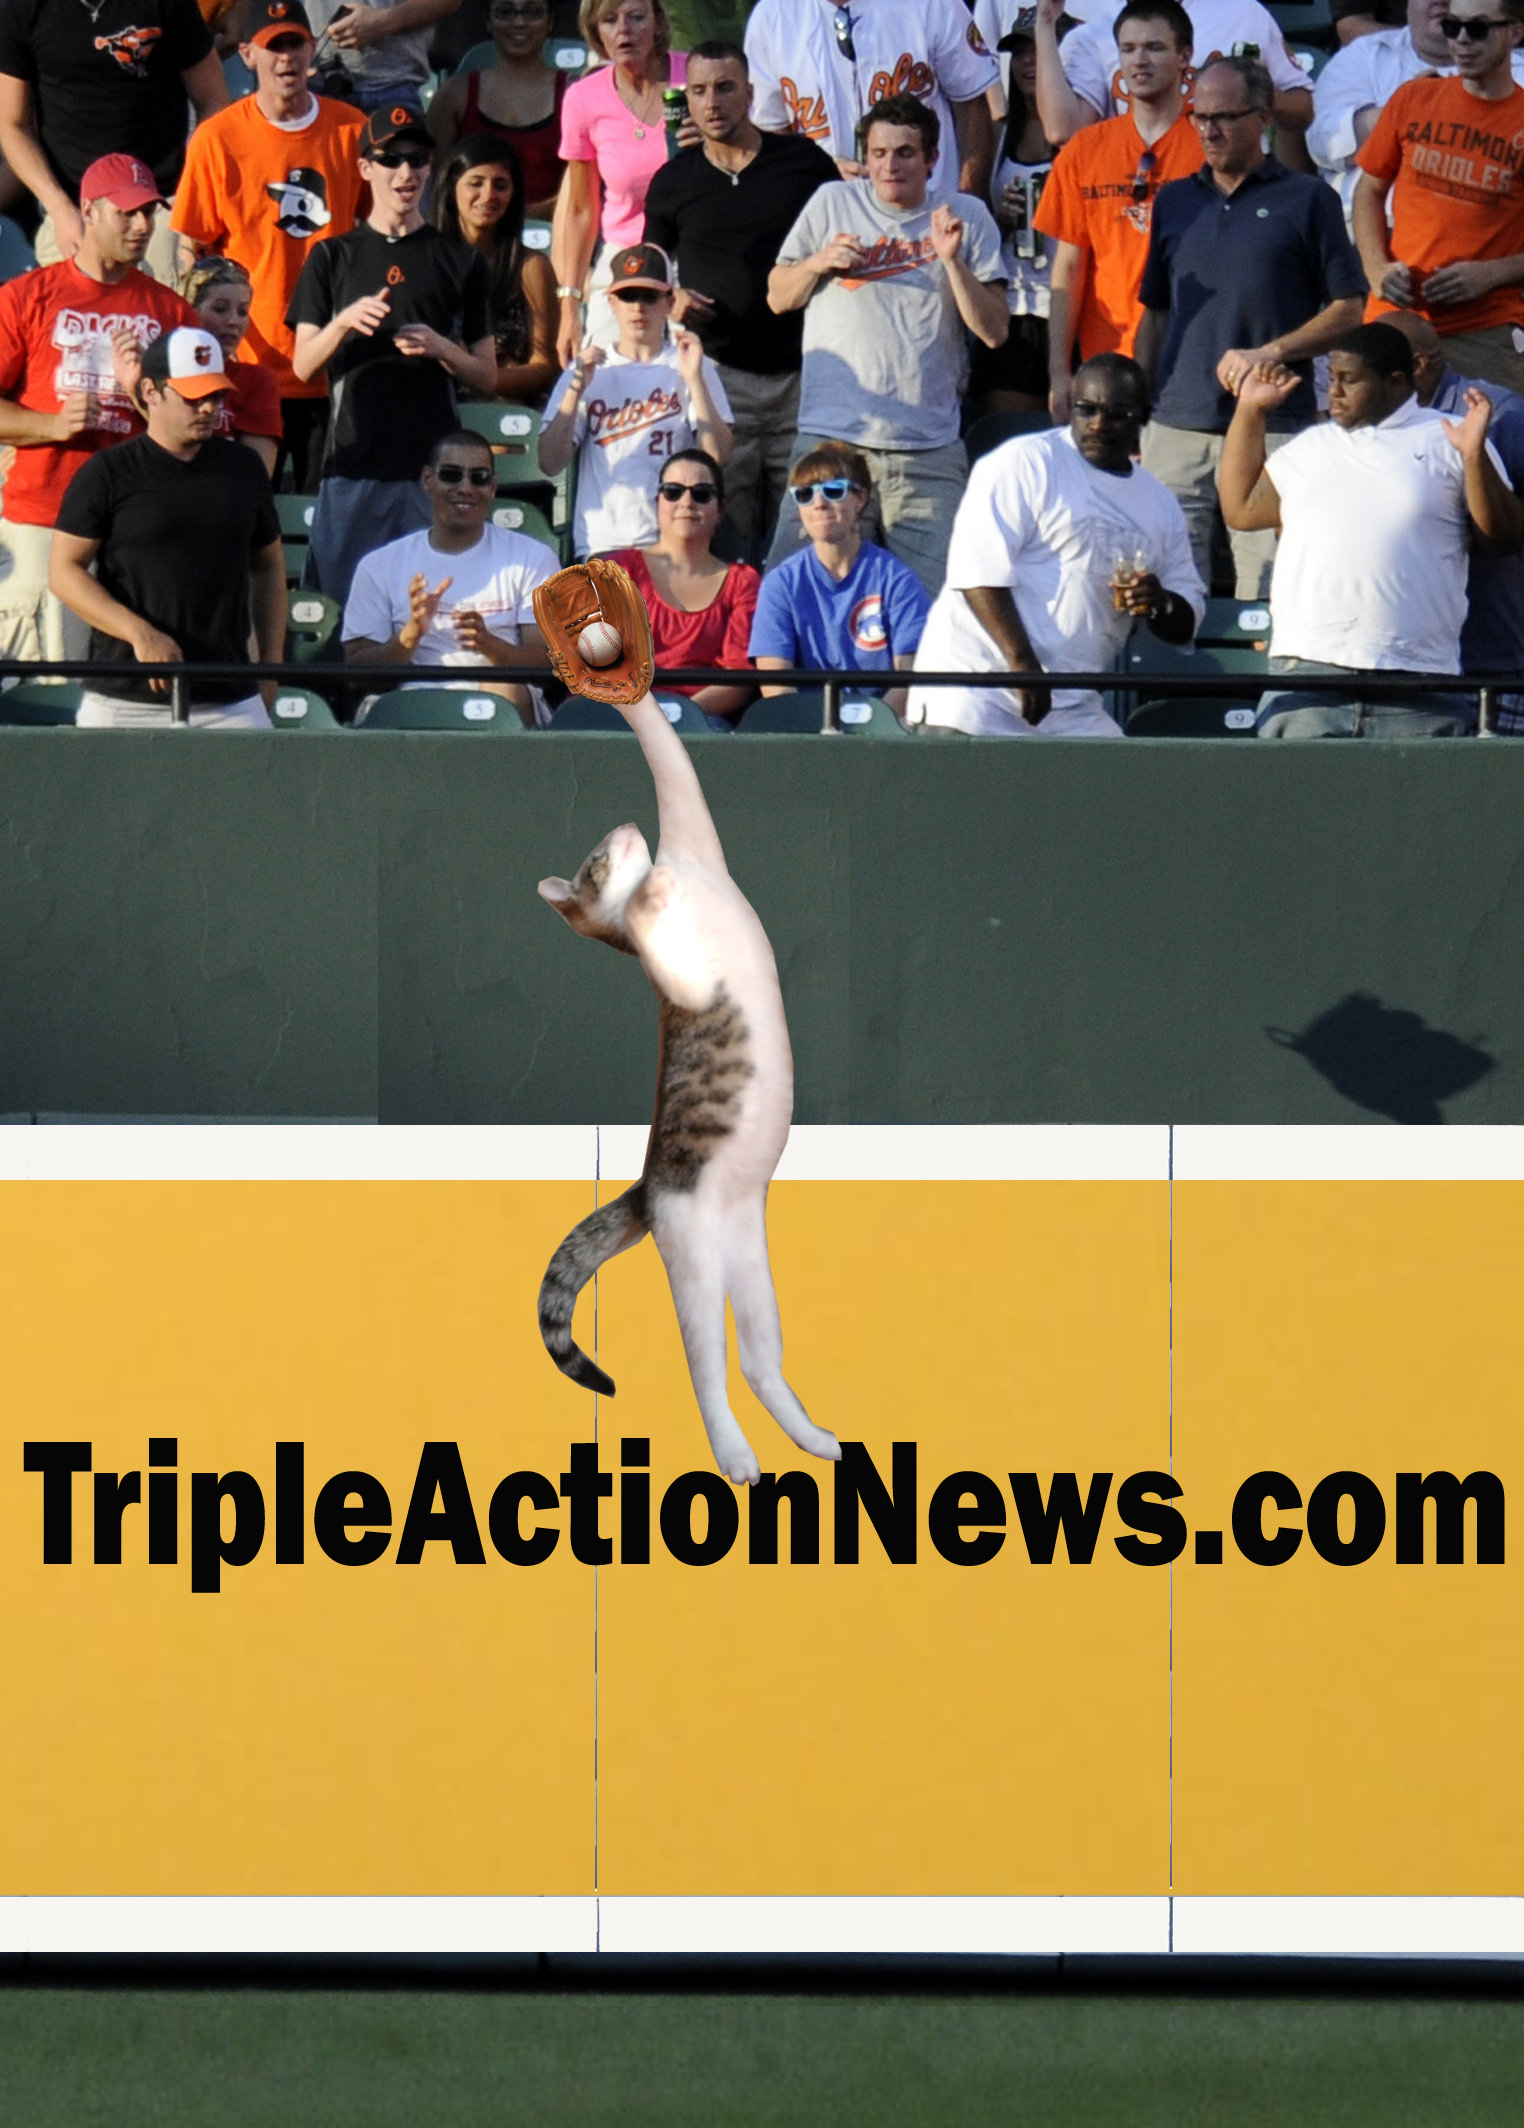 Amazing! I just learned that my cat, Elwood, played center field for the Tigers back in 2007. Here he is robbing Alex Rodriguez of a game-winning home run in a 2-1 win over the Yankees.